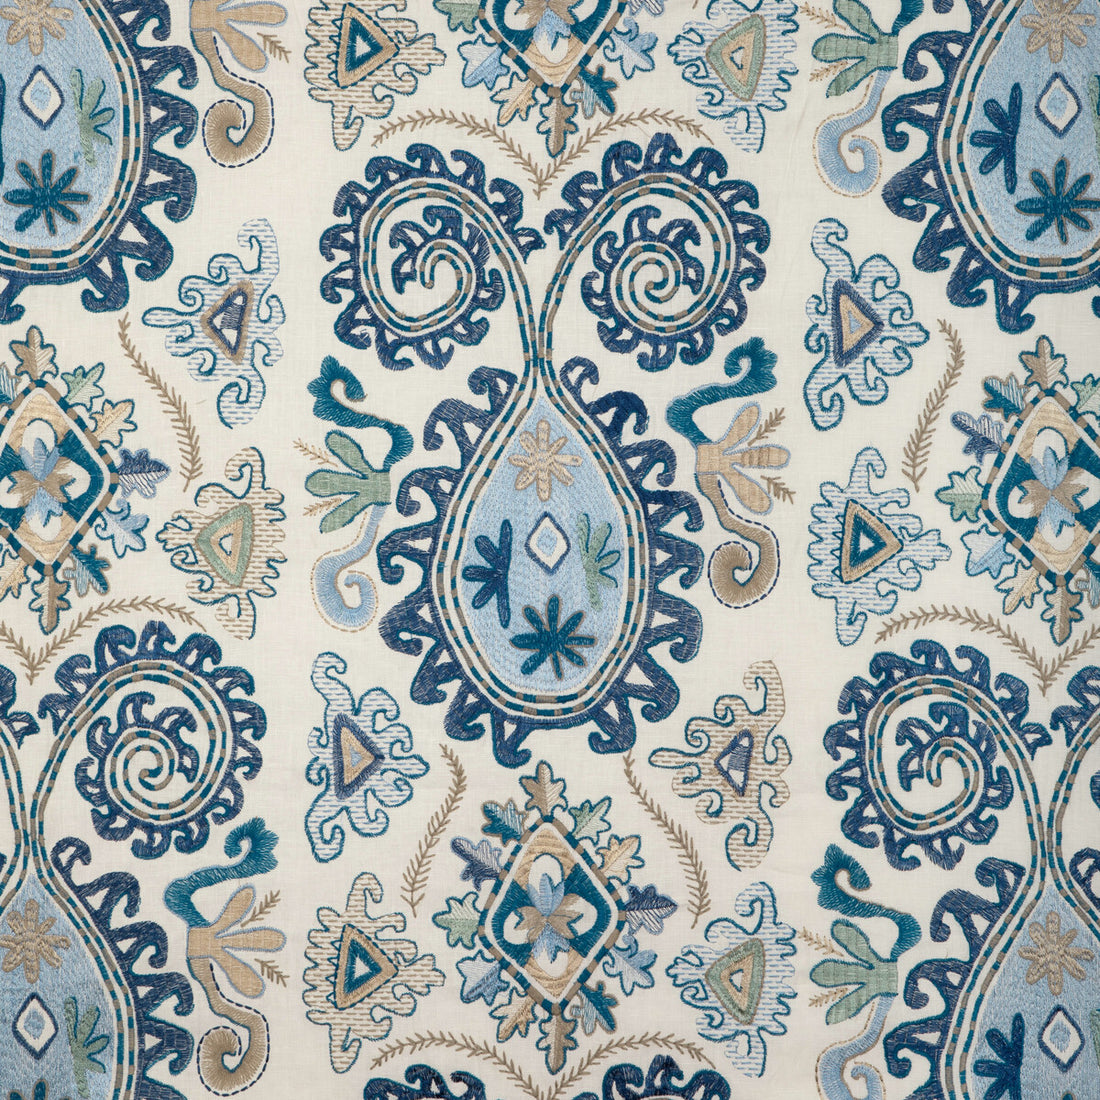 Lavali Emb fabric in blue/sky color - pattern 8023117.55.0 - by Brunschwig &amp; Fils in the Anduze Embroideries collection